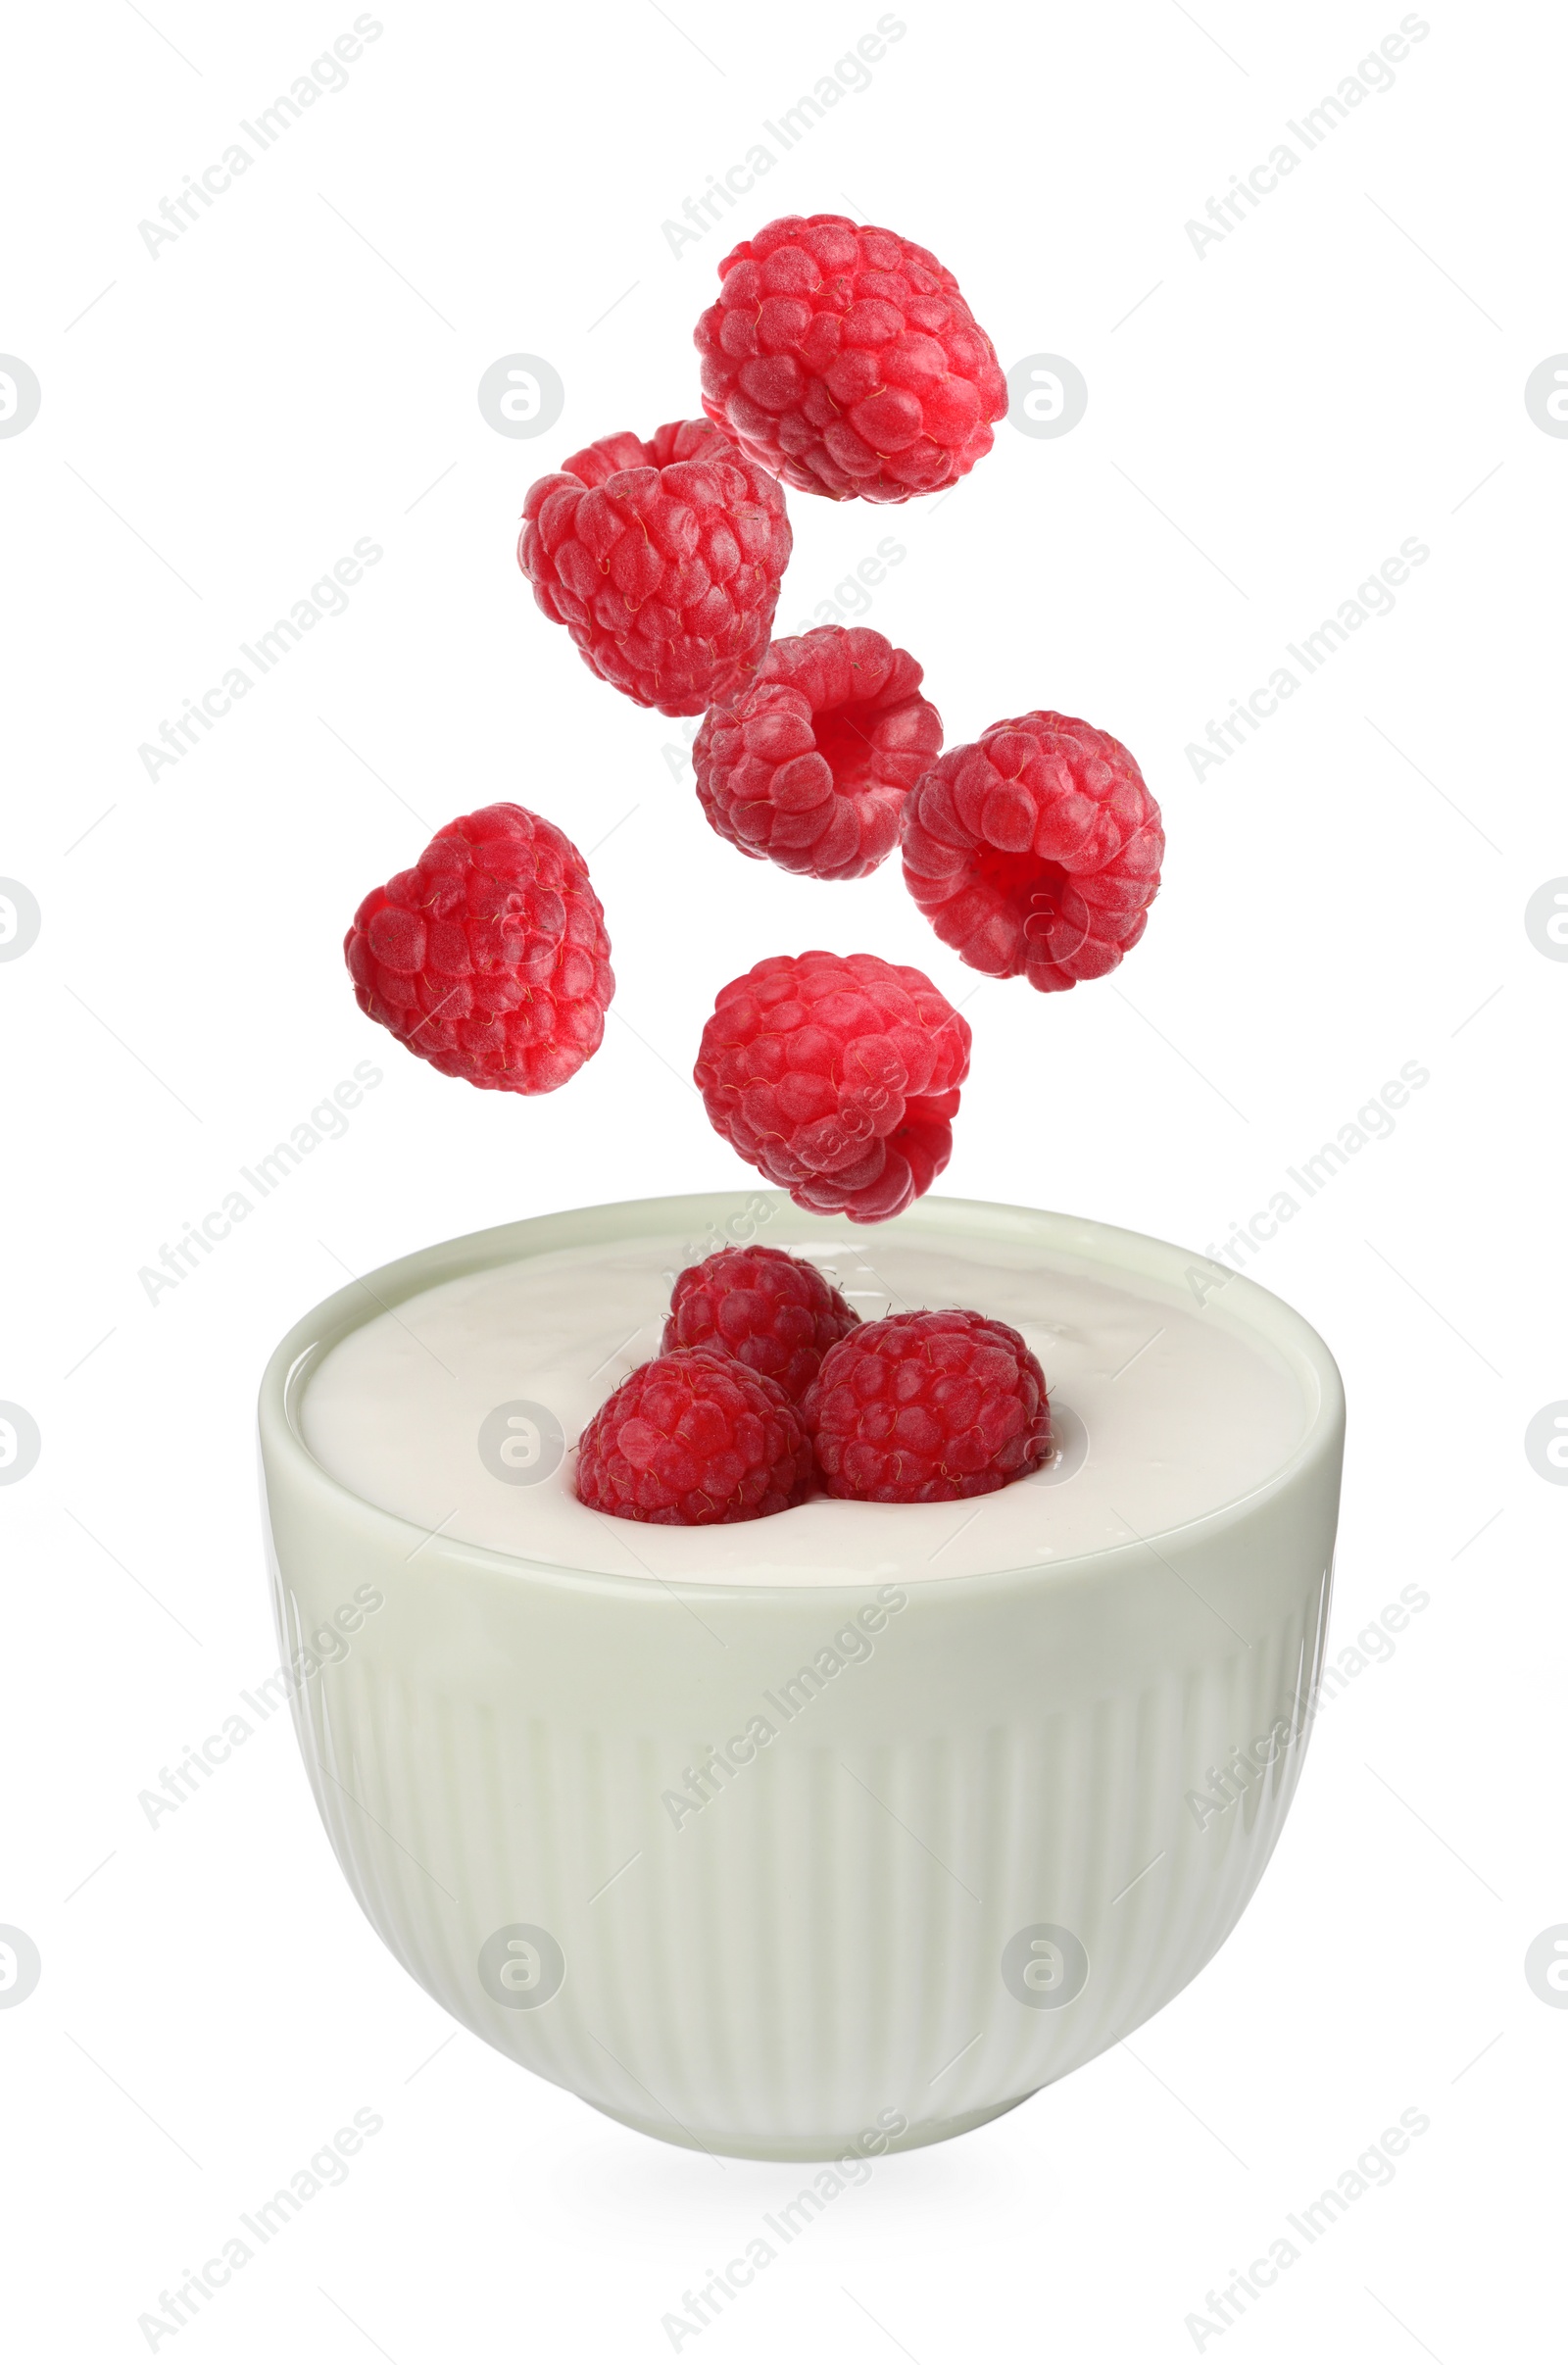 Image of Delicious ripe raspberries falling into bowl with yogurt on white background